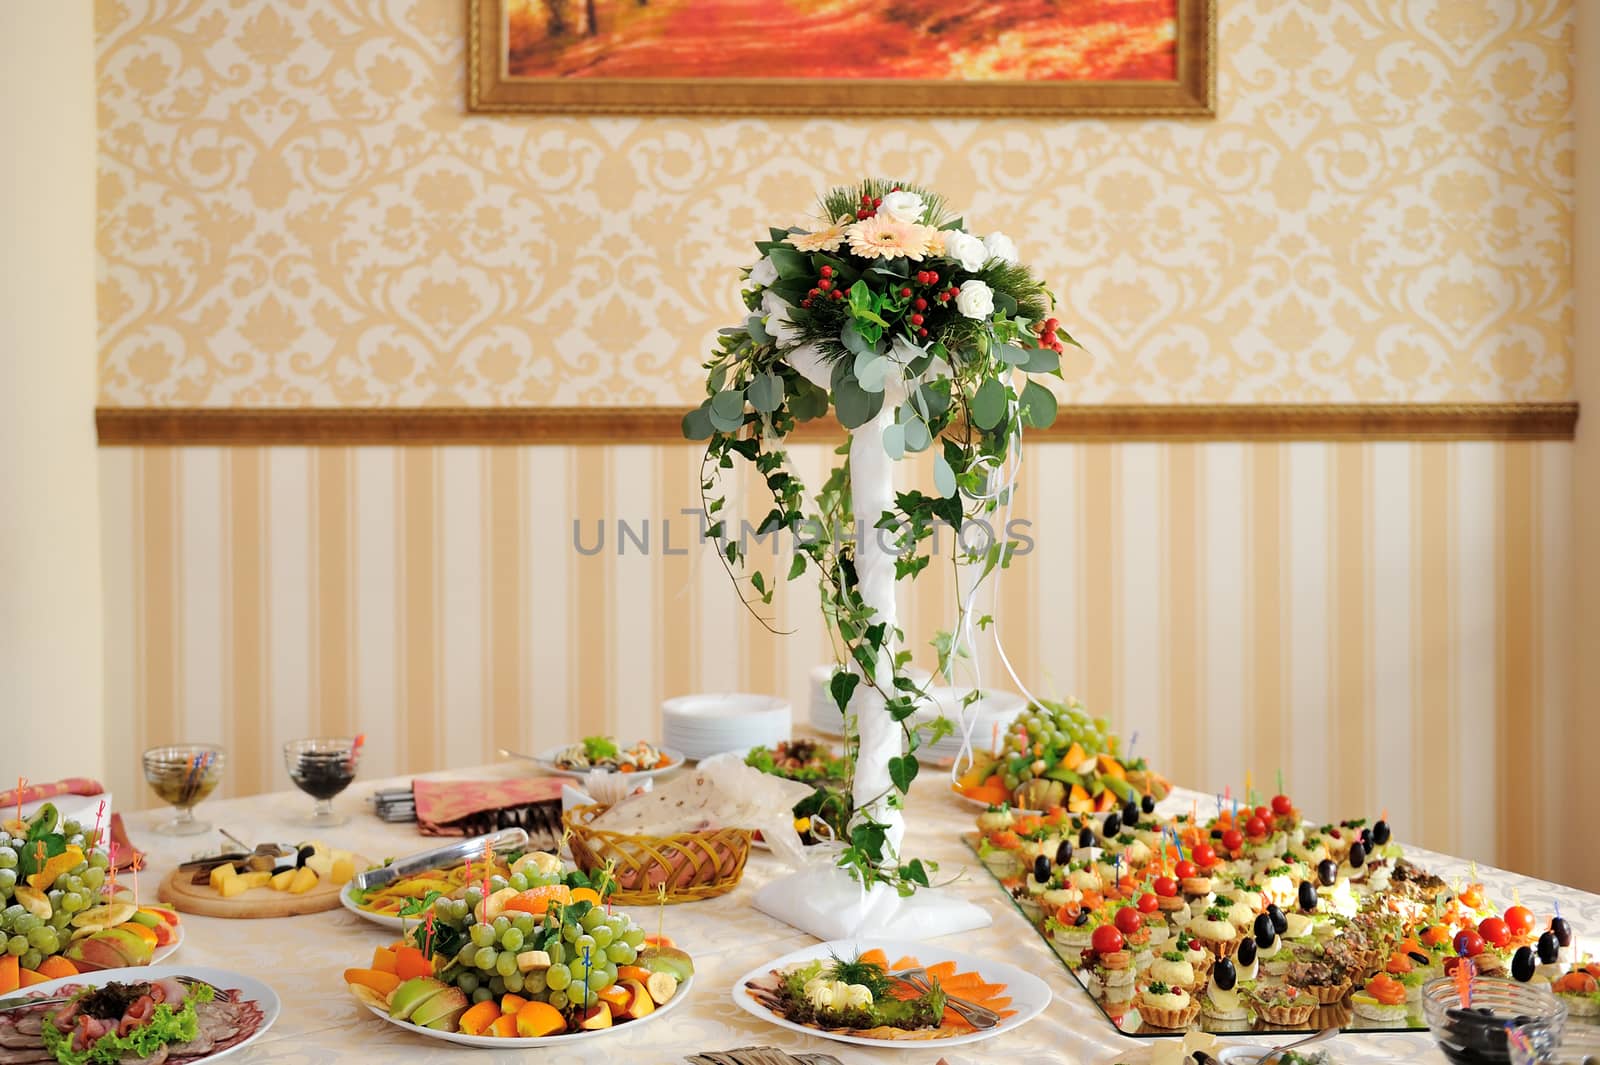 table set for wedding dinner decorated with flowers